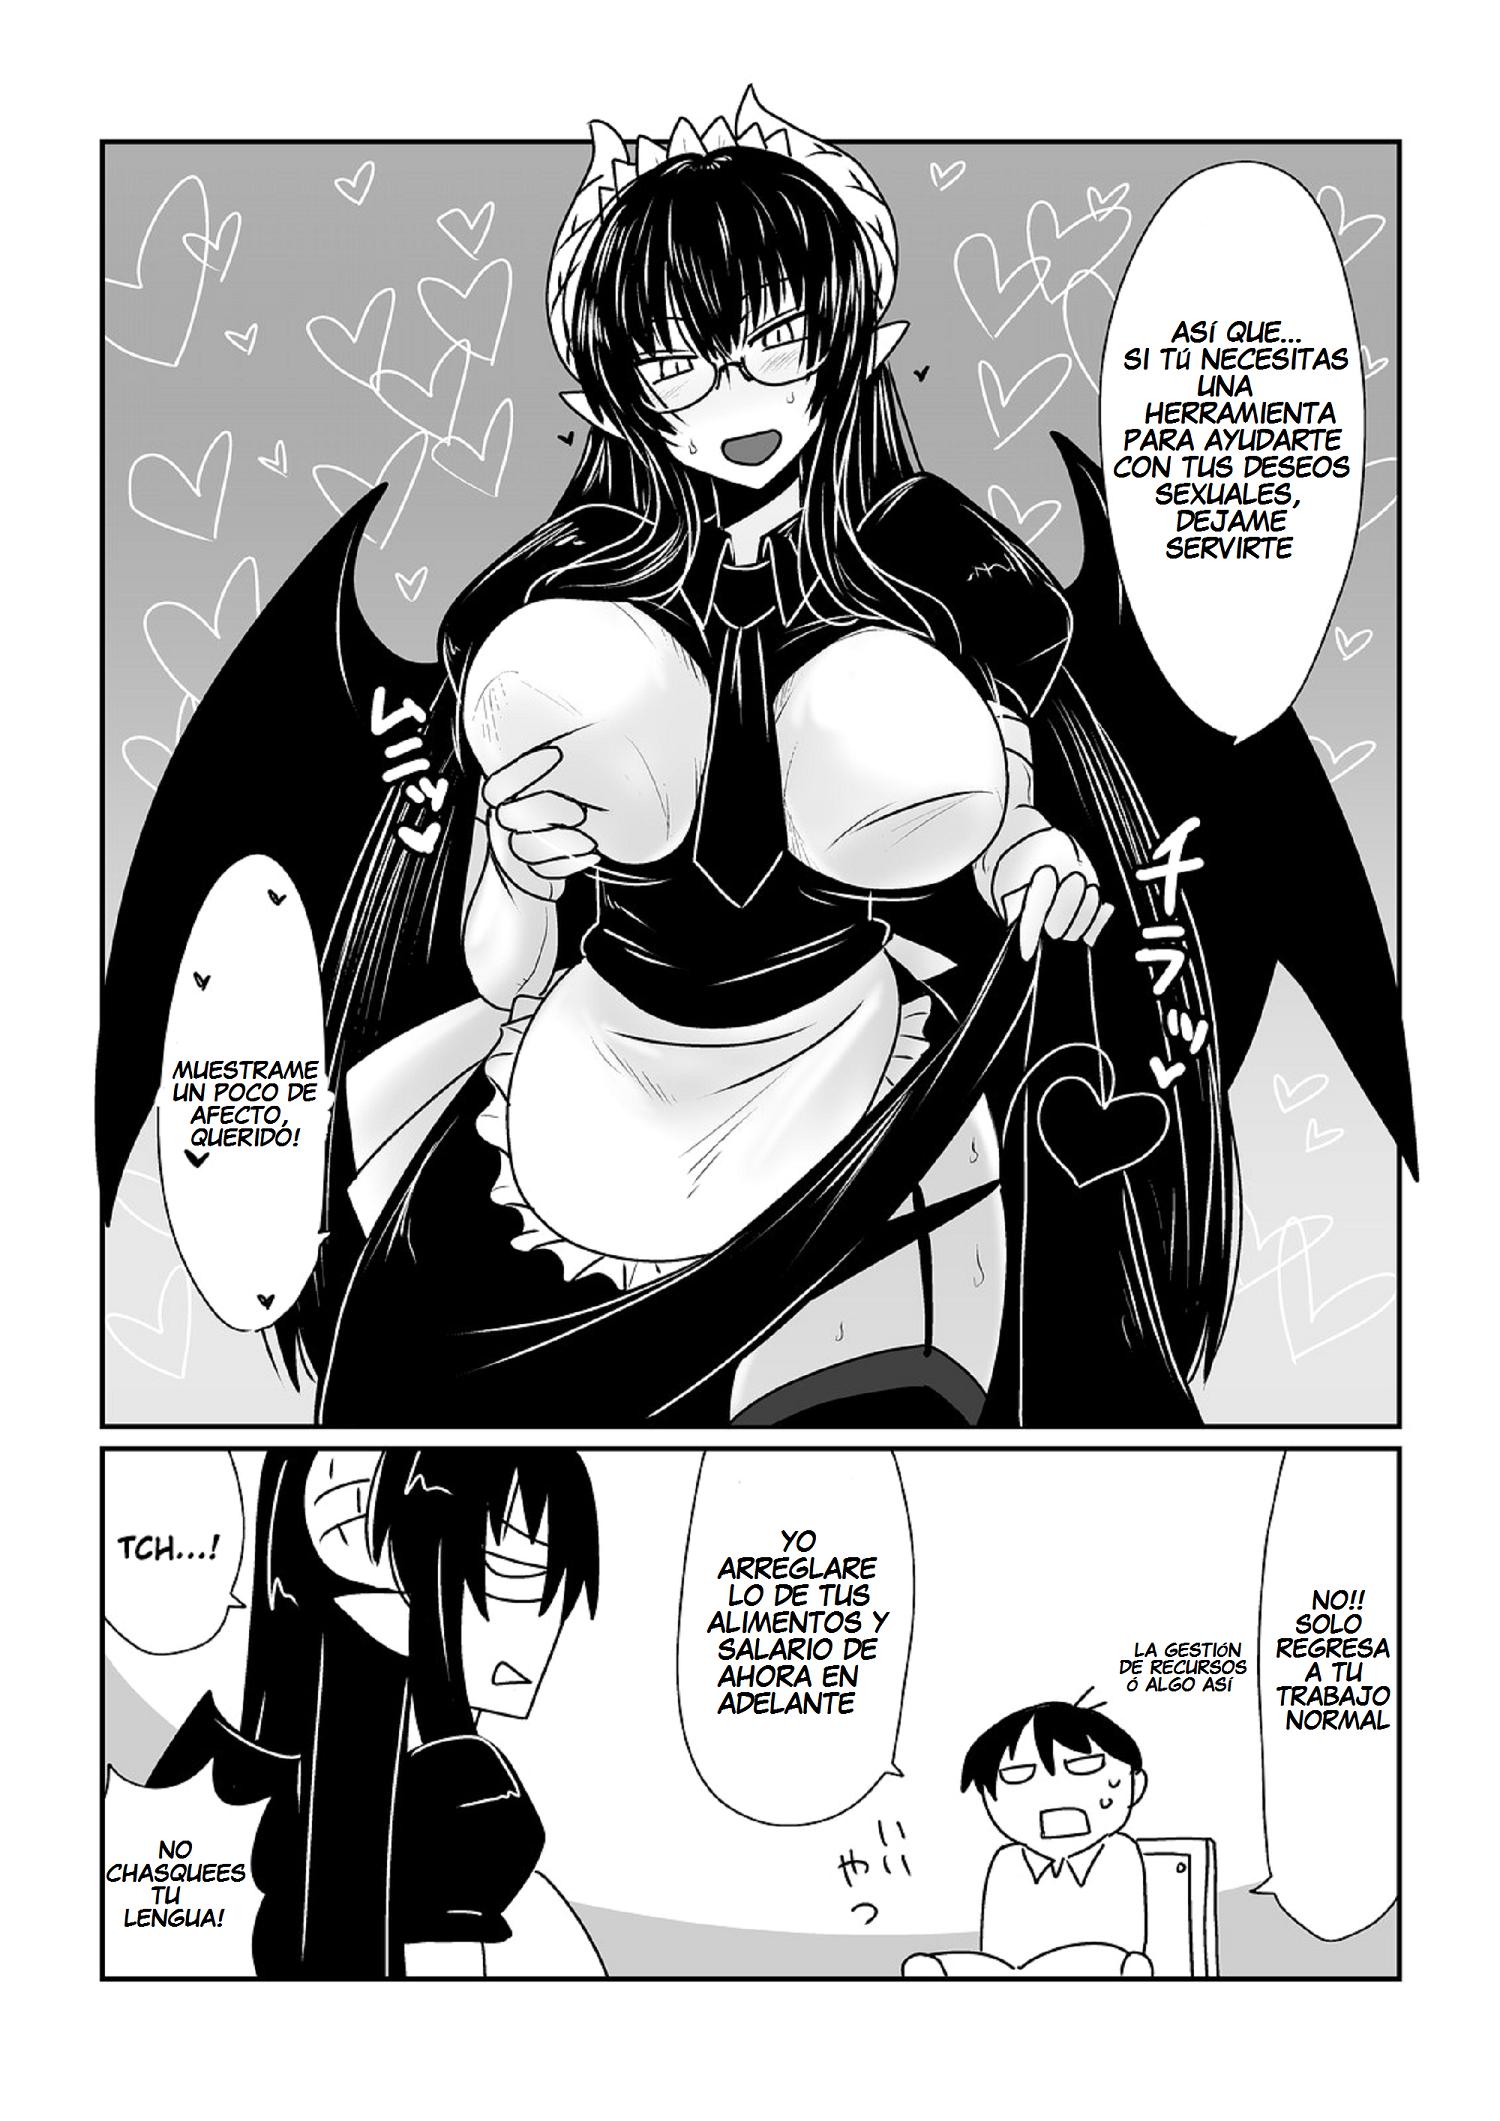 THE SUCCUBUS MAID Chapter-1 - 5